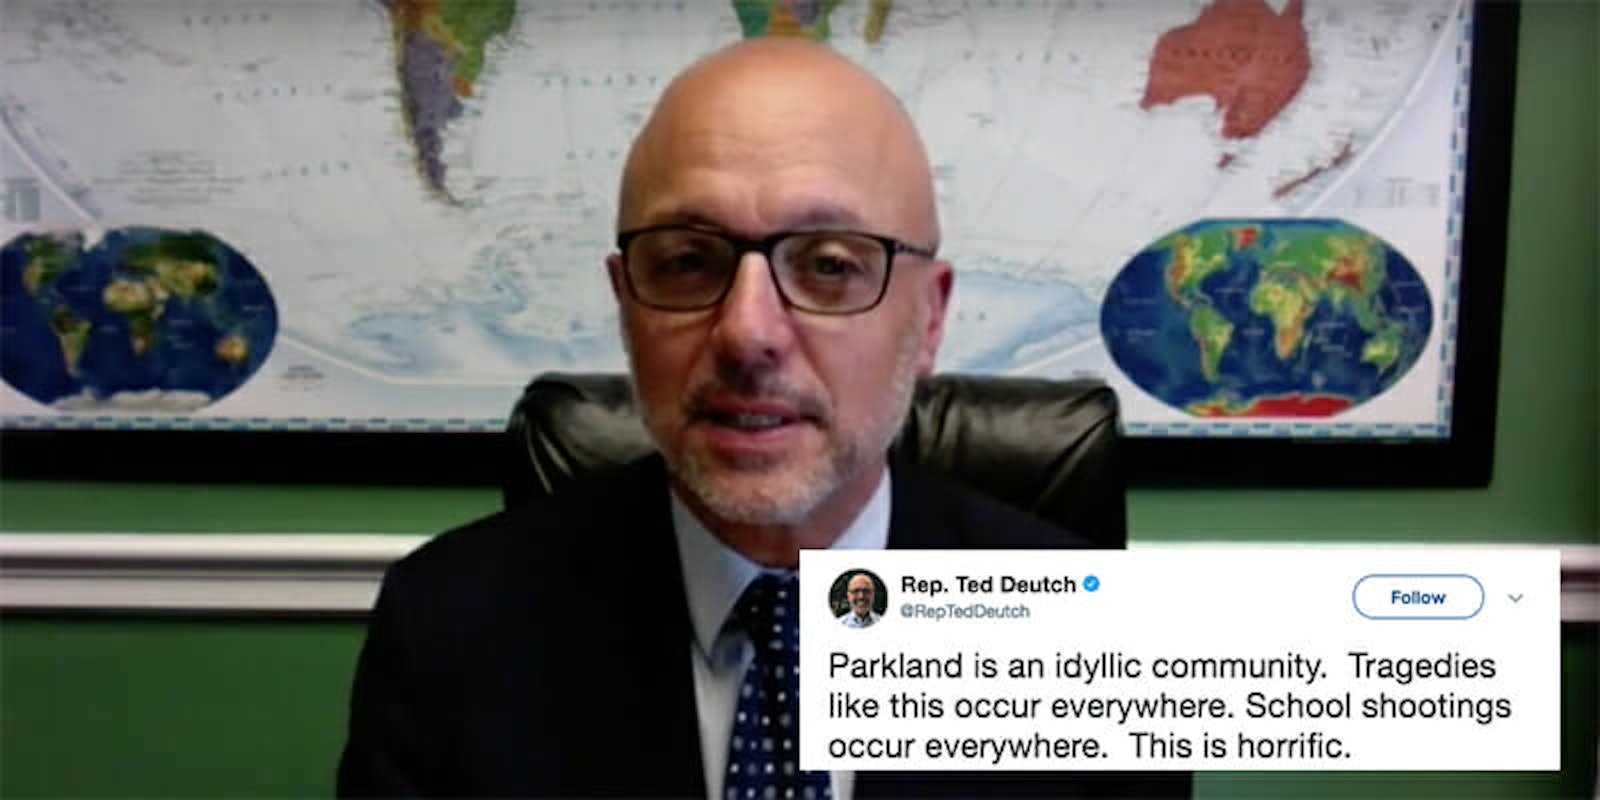 Rep. Ted Deutch (D-Fla.), who represents Parkland, spoke out in favor of gun control long before a shooting occurred in his district.